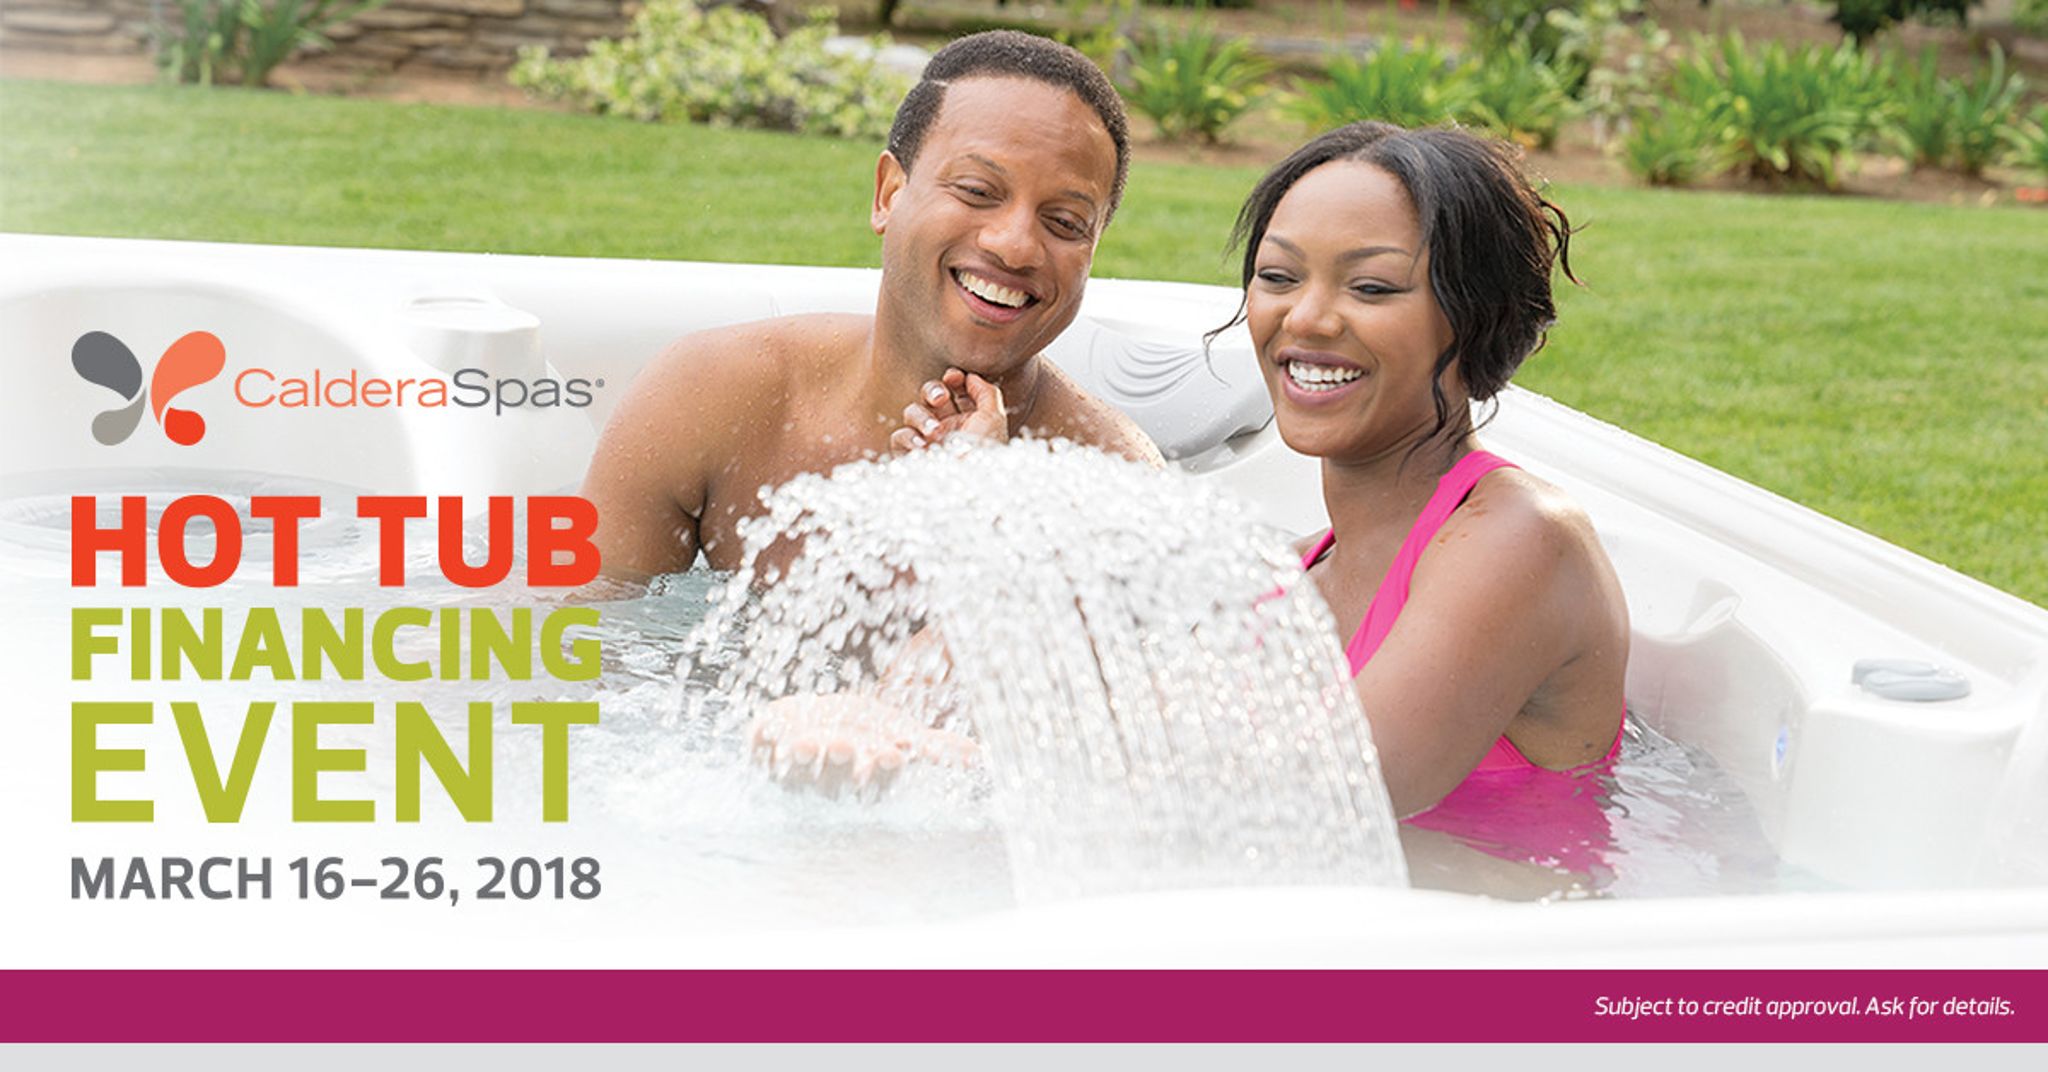 Special Hot Tub Financing Event